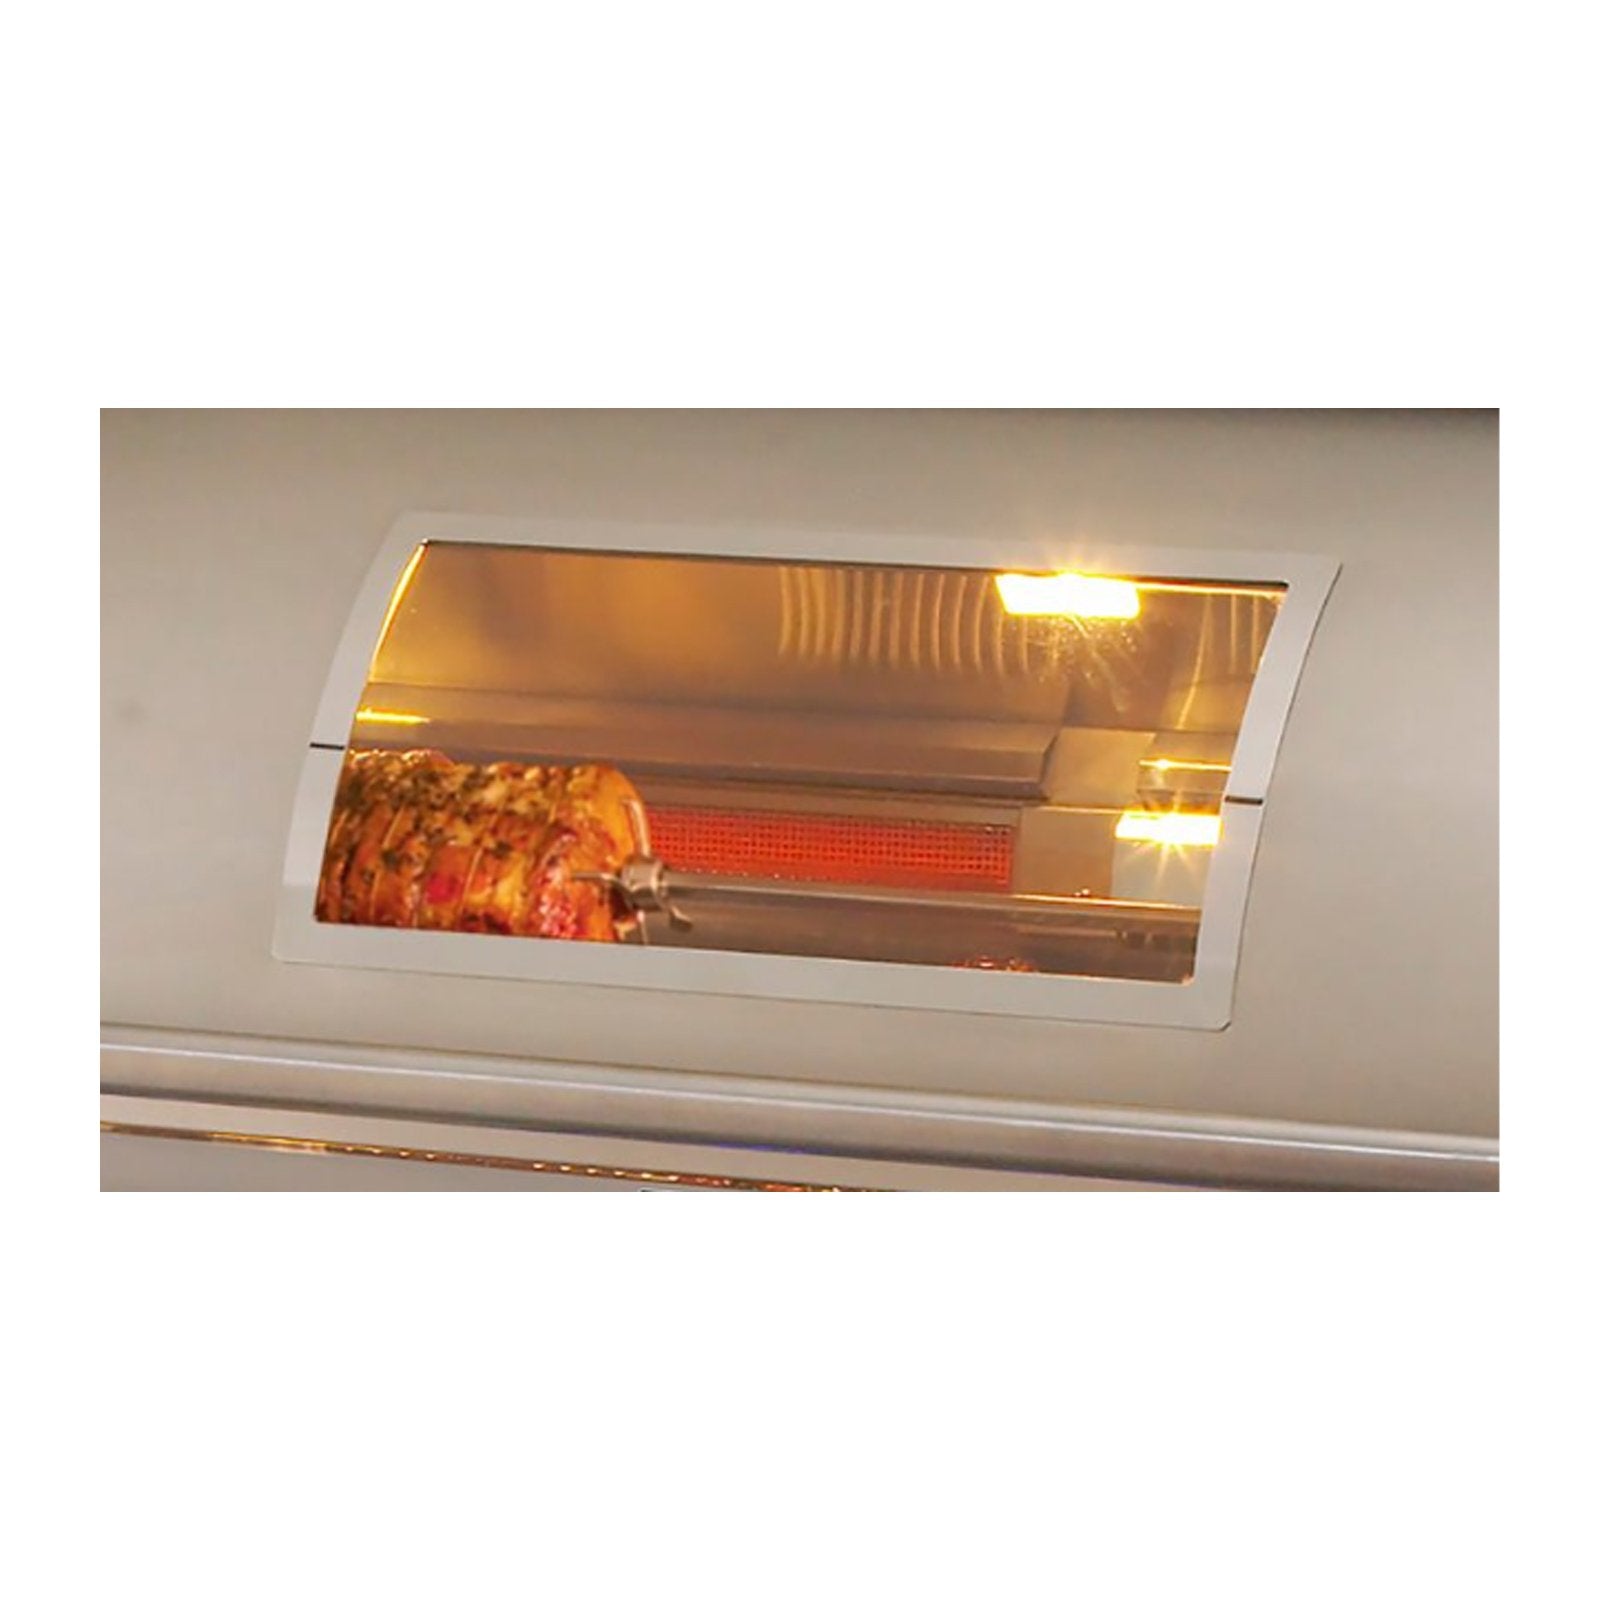 fire-magic-e790i-36-built-in-grill-w-rotis-window-analog-thermometer 12